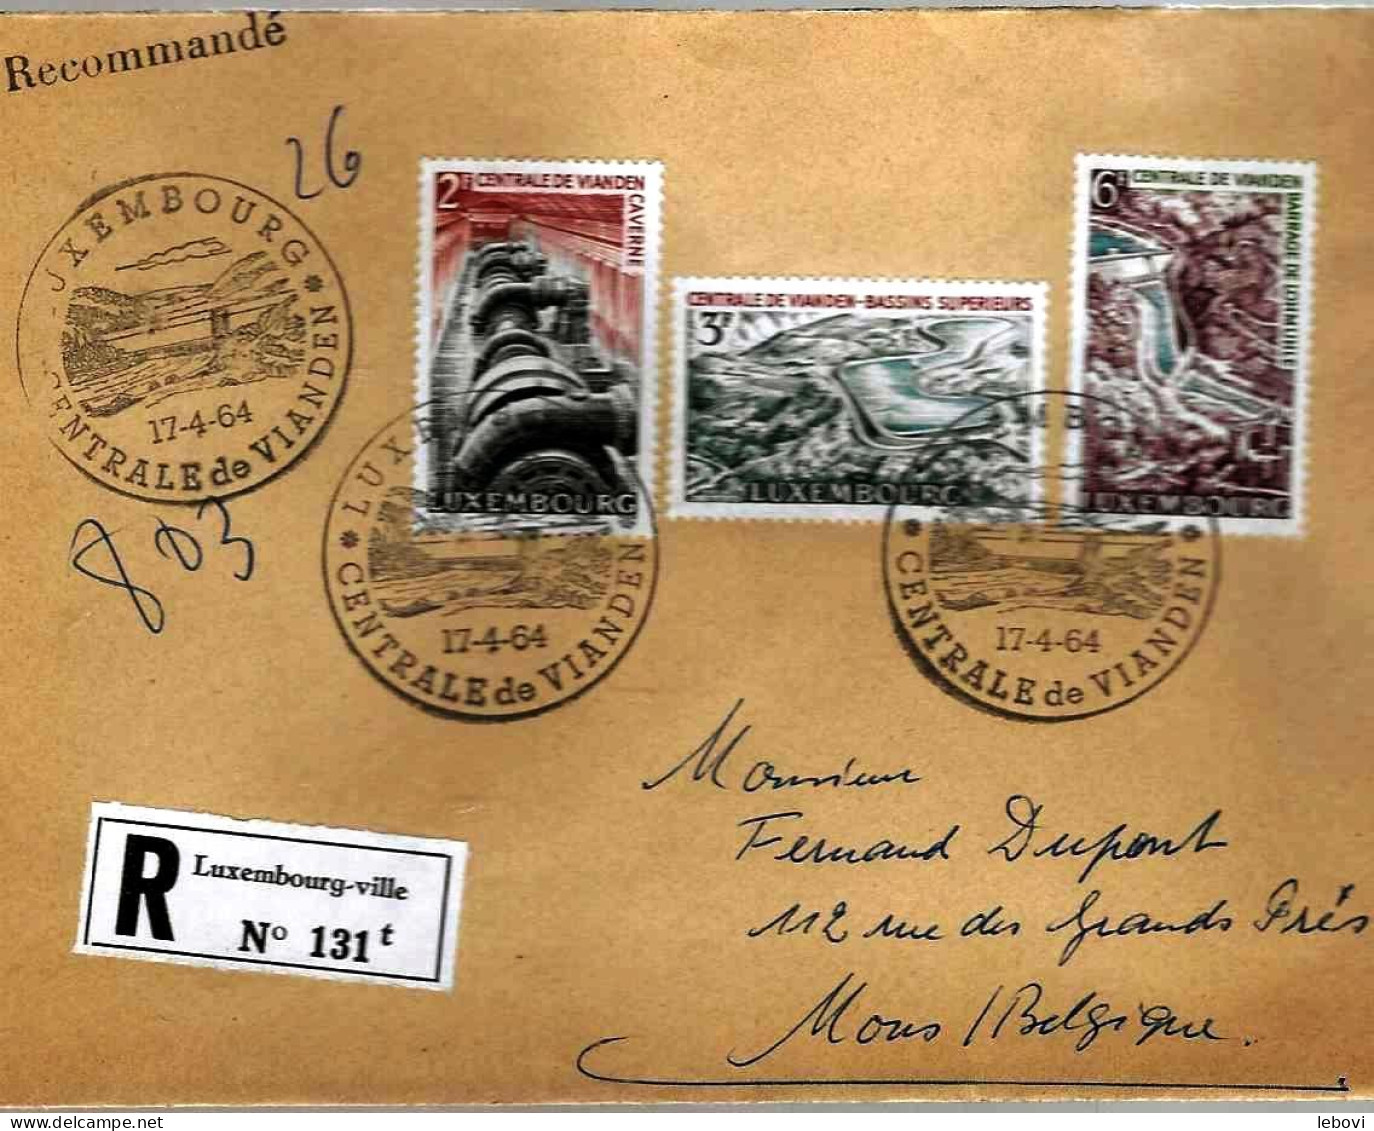 (Luxembourg) Pli RECOMMANDE De ‘LUXEMBOURG Vers MONS (17-4-64) - Stamped Stationery